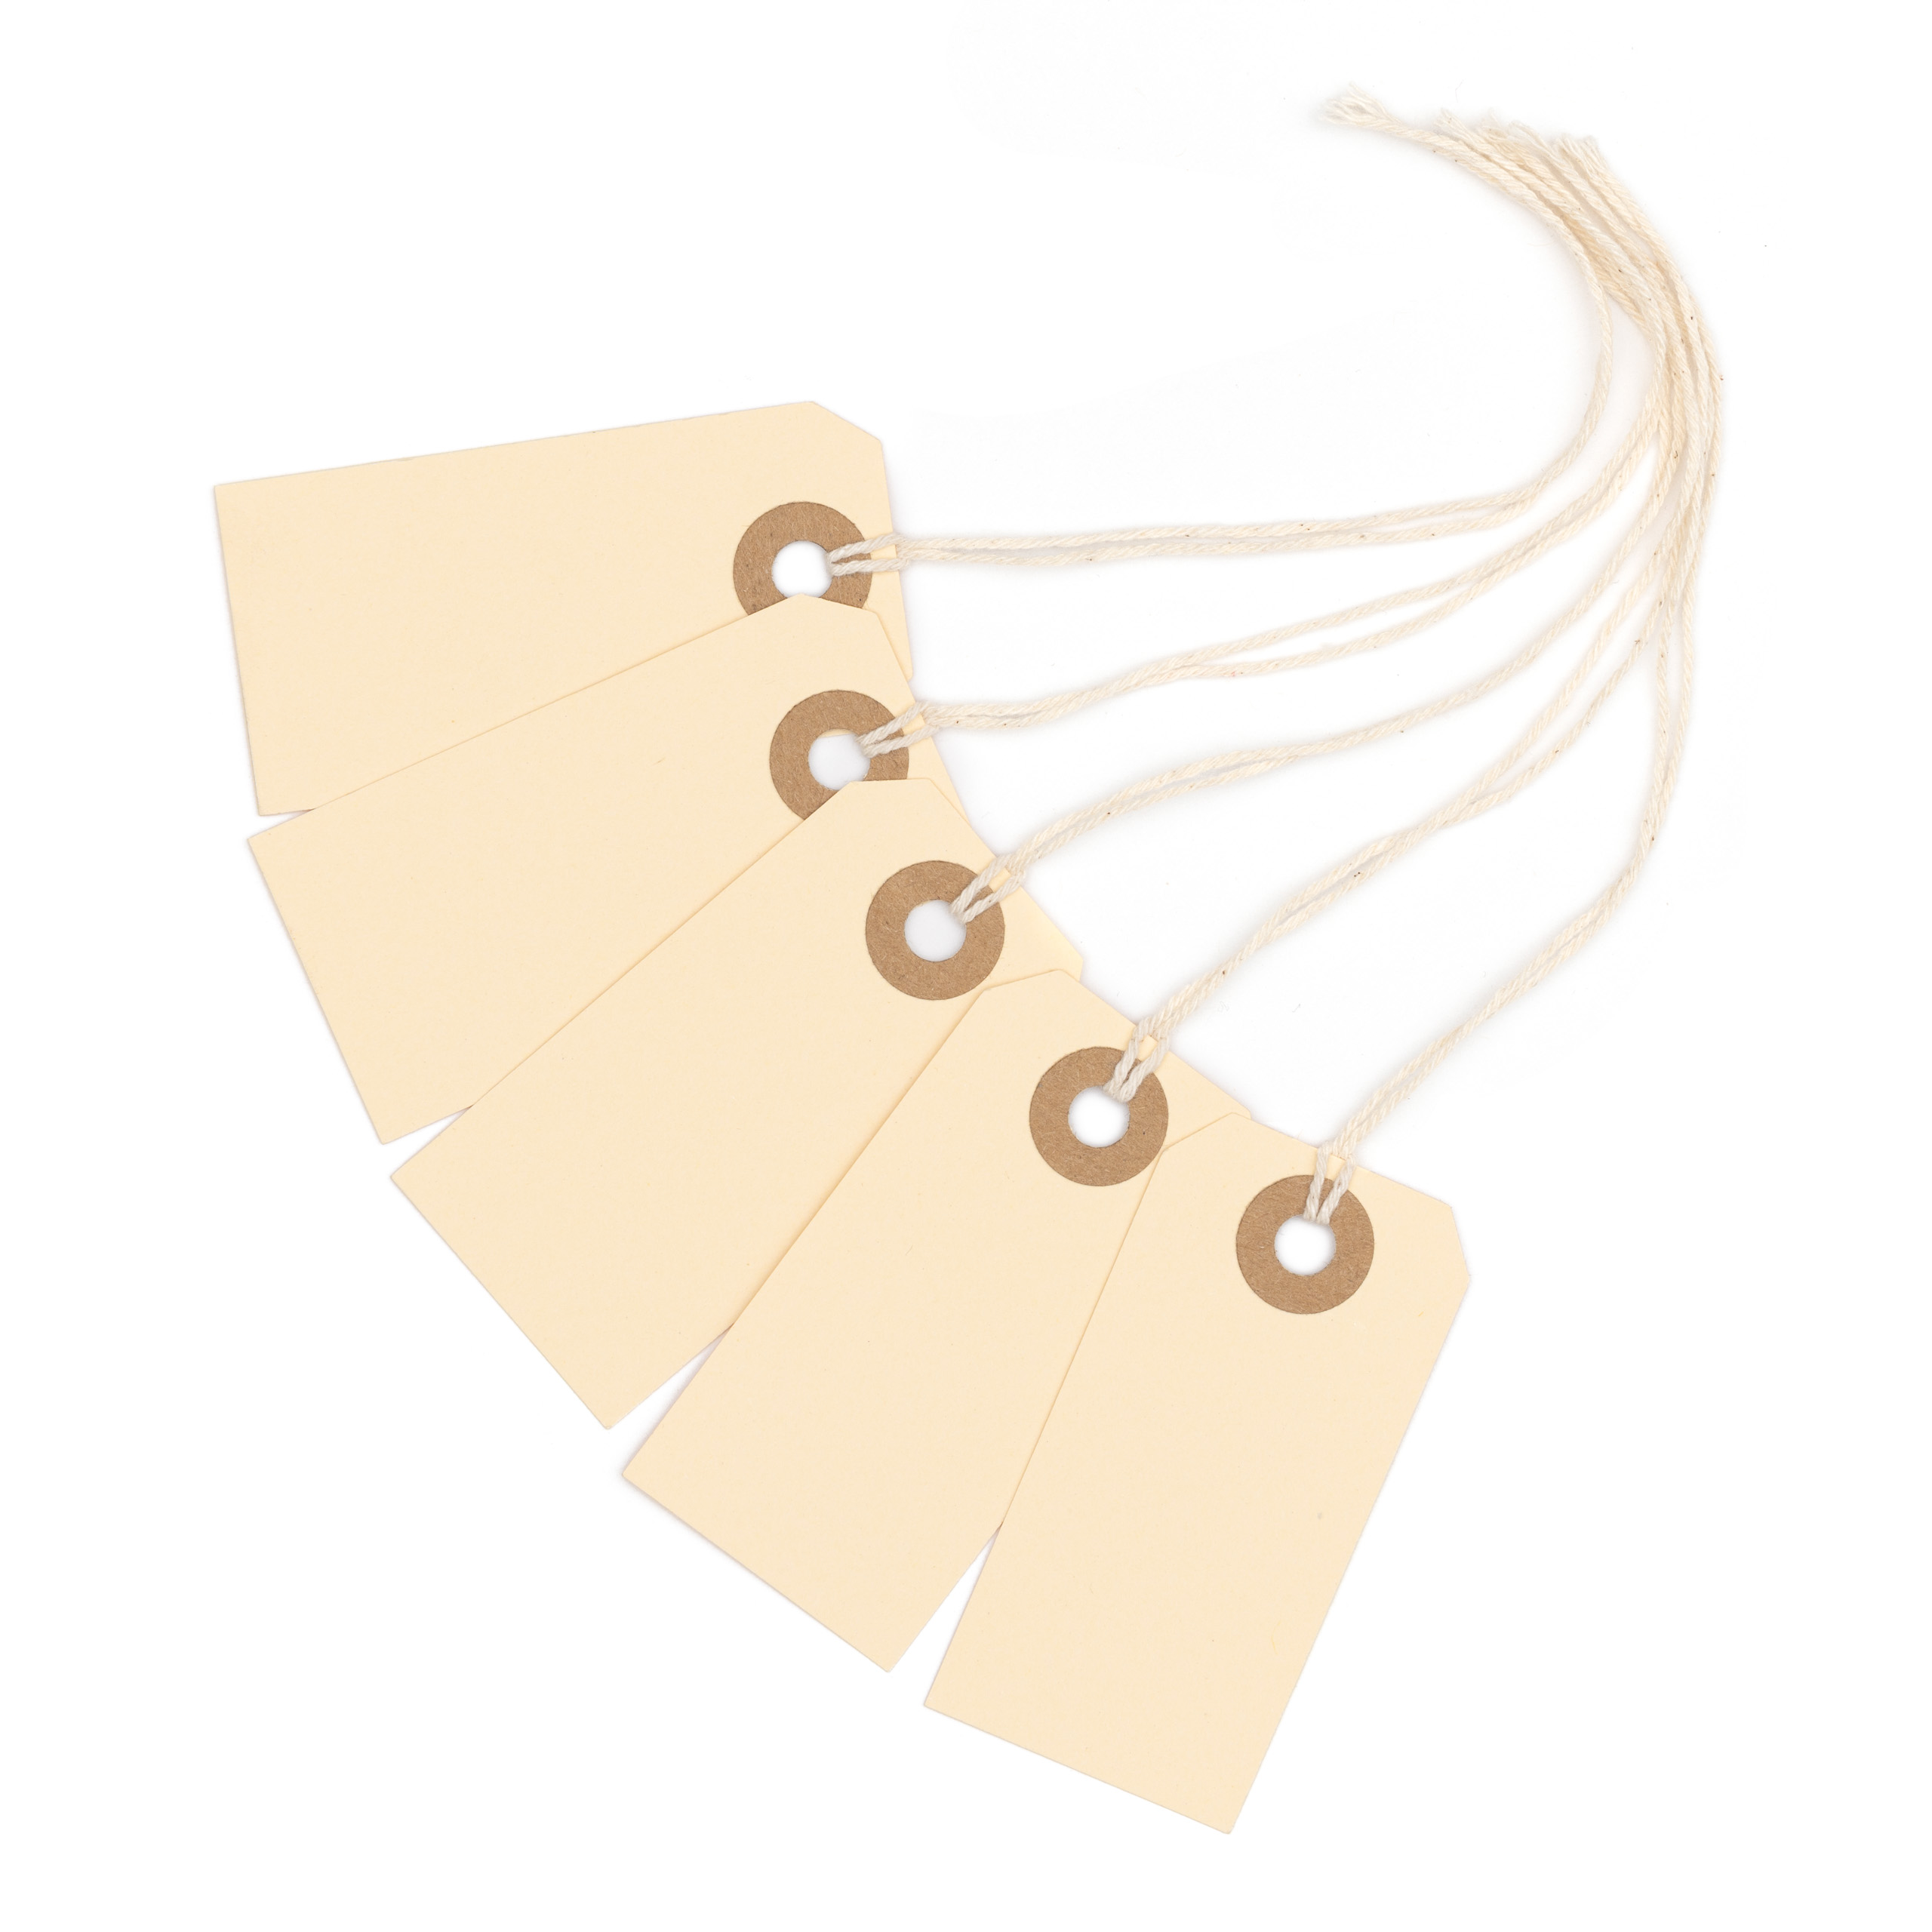 Manila Paper Tags #1 with Wire Attached, 2 3/4” x 1 3/8”, (Box of 250)  Blank Manila Paper Label Tags with Metal String and Reinforced Hole - EZDOM  Tags